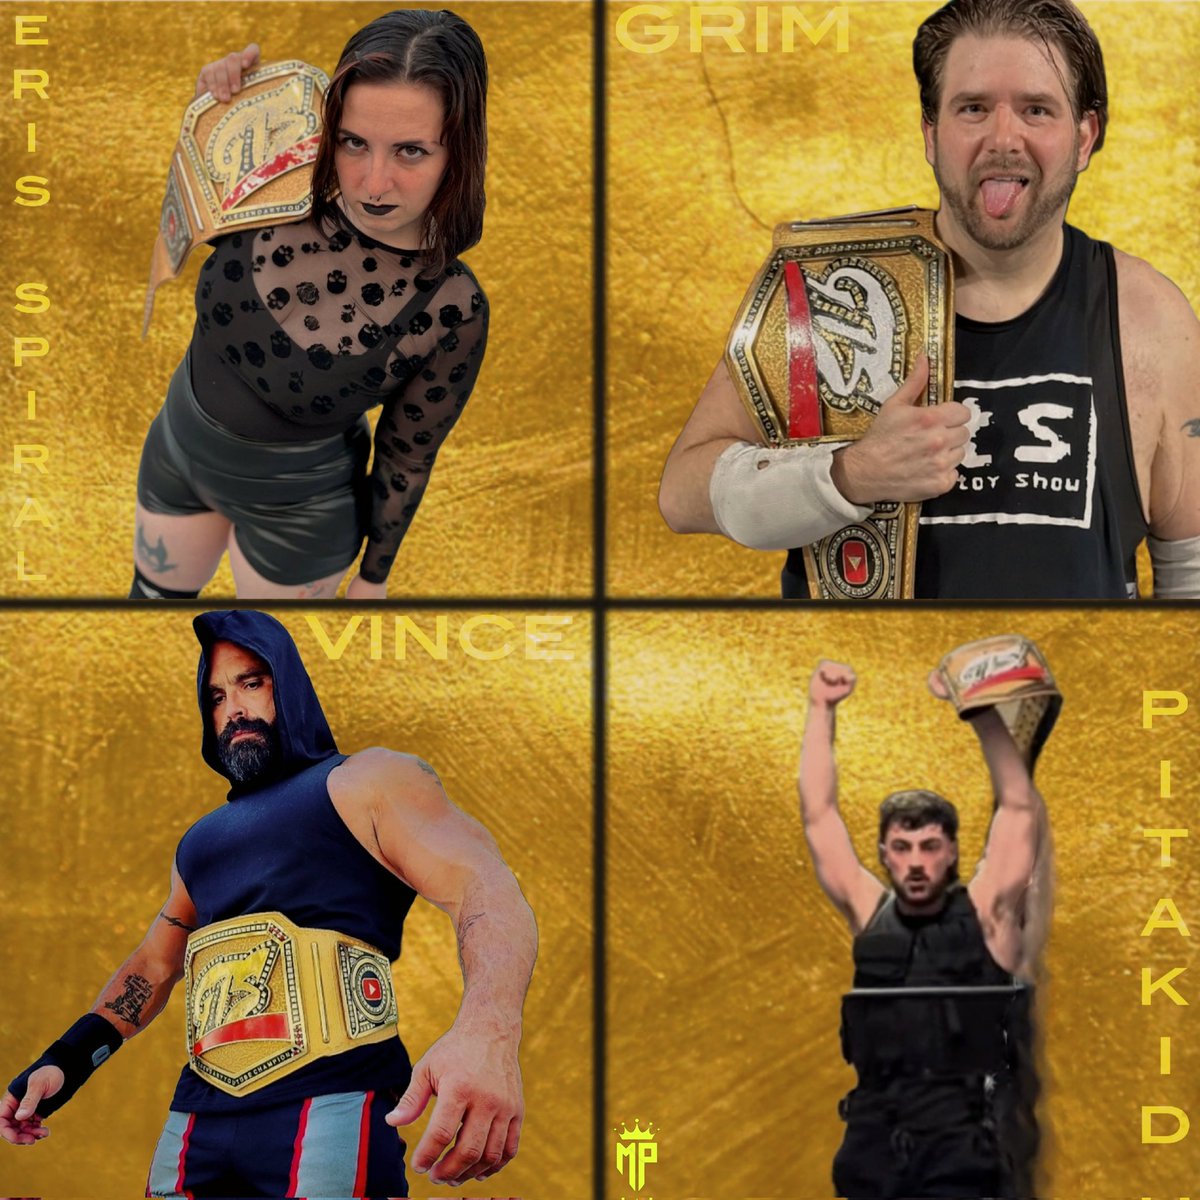 What Champion do you guys want to see After Grimamania 10? They all held the title before tbh i love all of them but i got to go with Pita Kid 🔥, but may the best person win the title! 🔥🔥 @ChrisFicsor @GrimsToyShow @vince_ceres @eris_spiral What Team Are Yall On ???